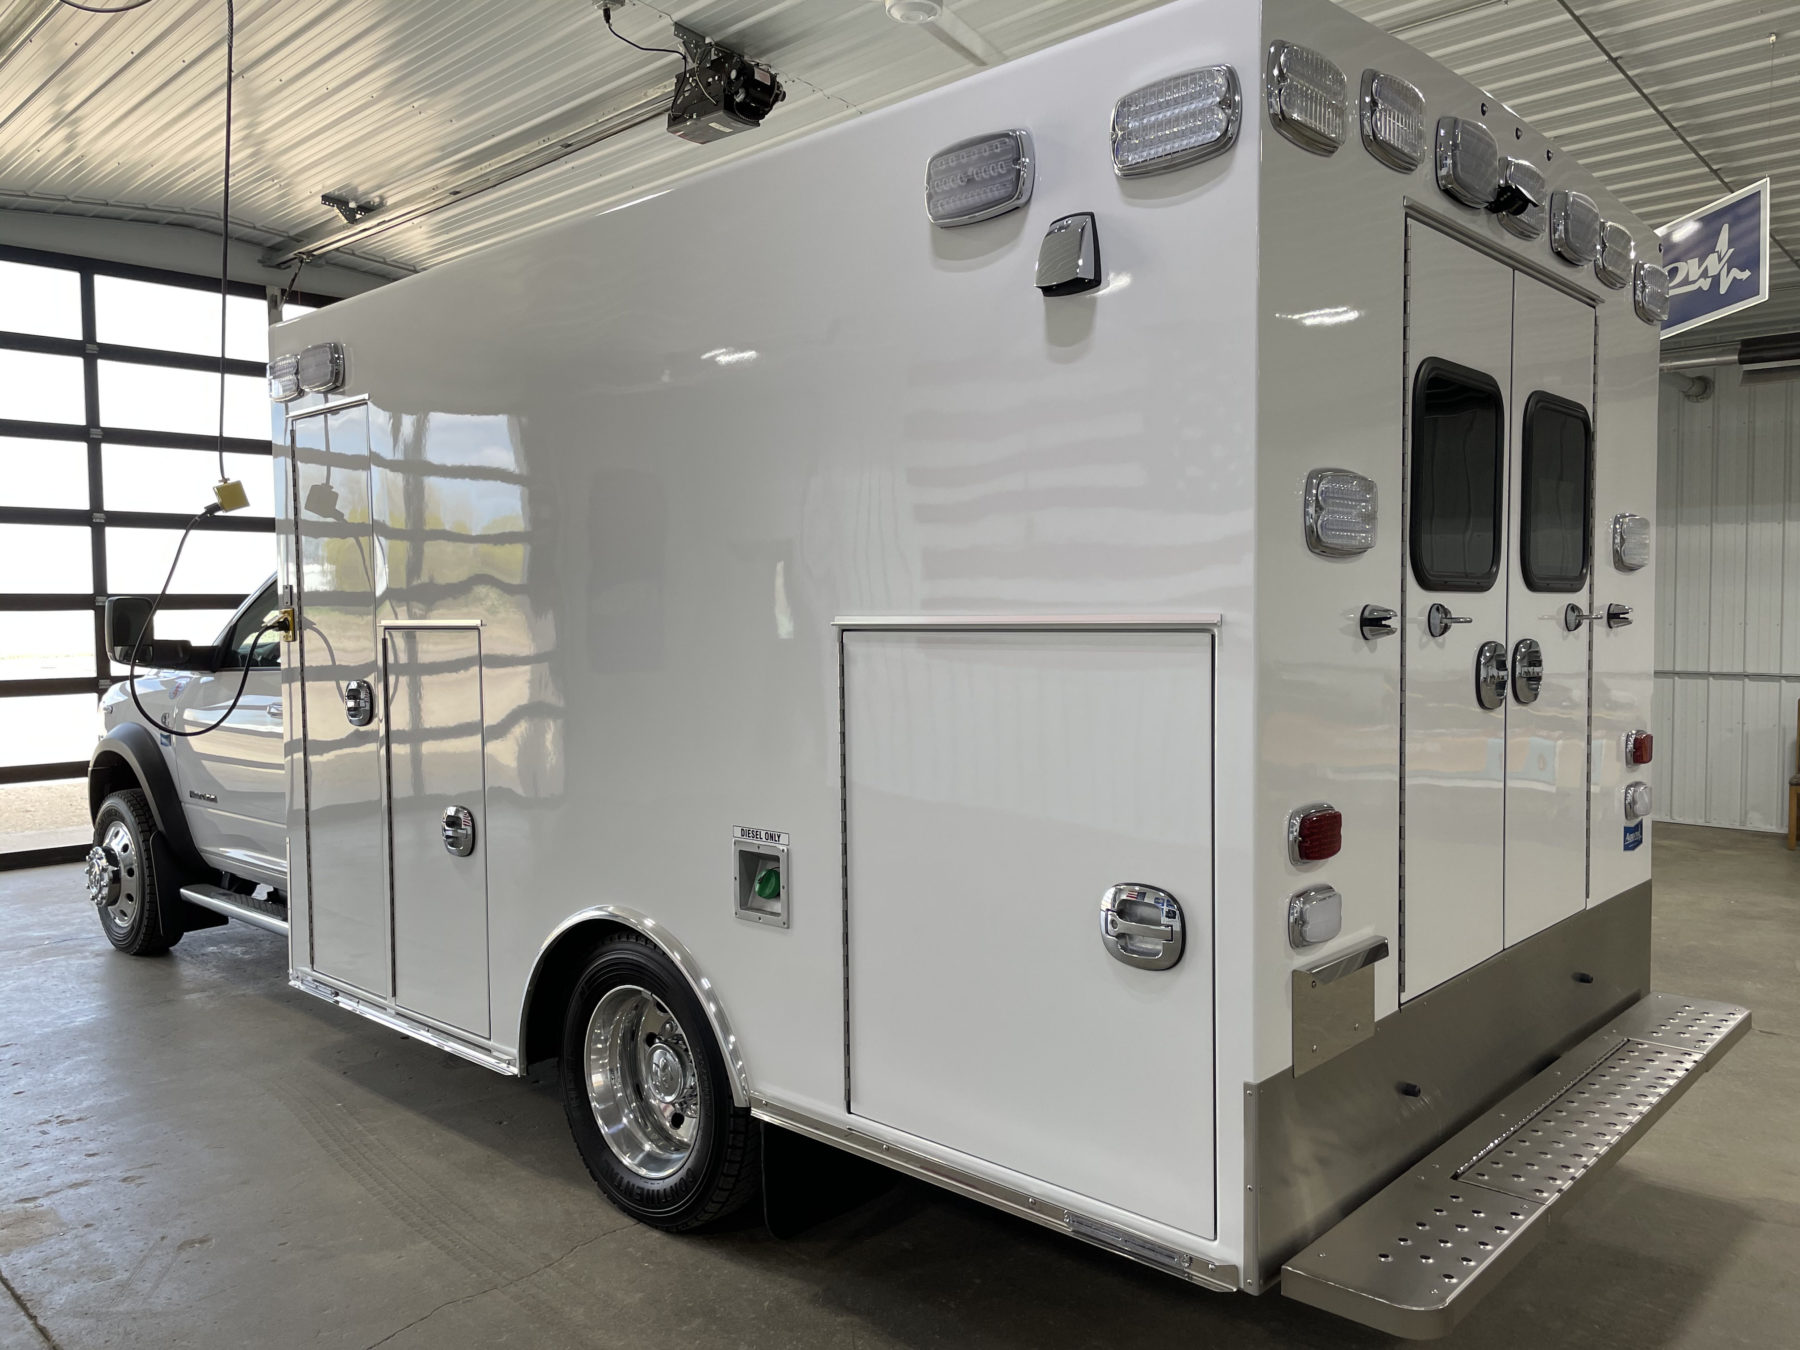 2020 Ram 4500 4x4 Heavy Duty Ambulance For Sale – Picture 7